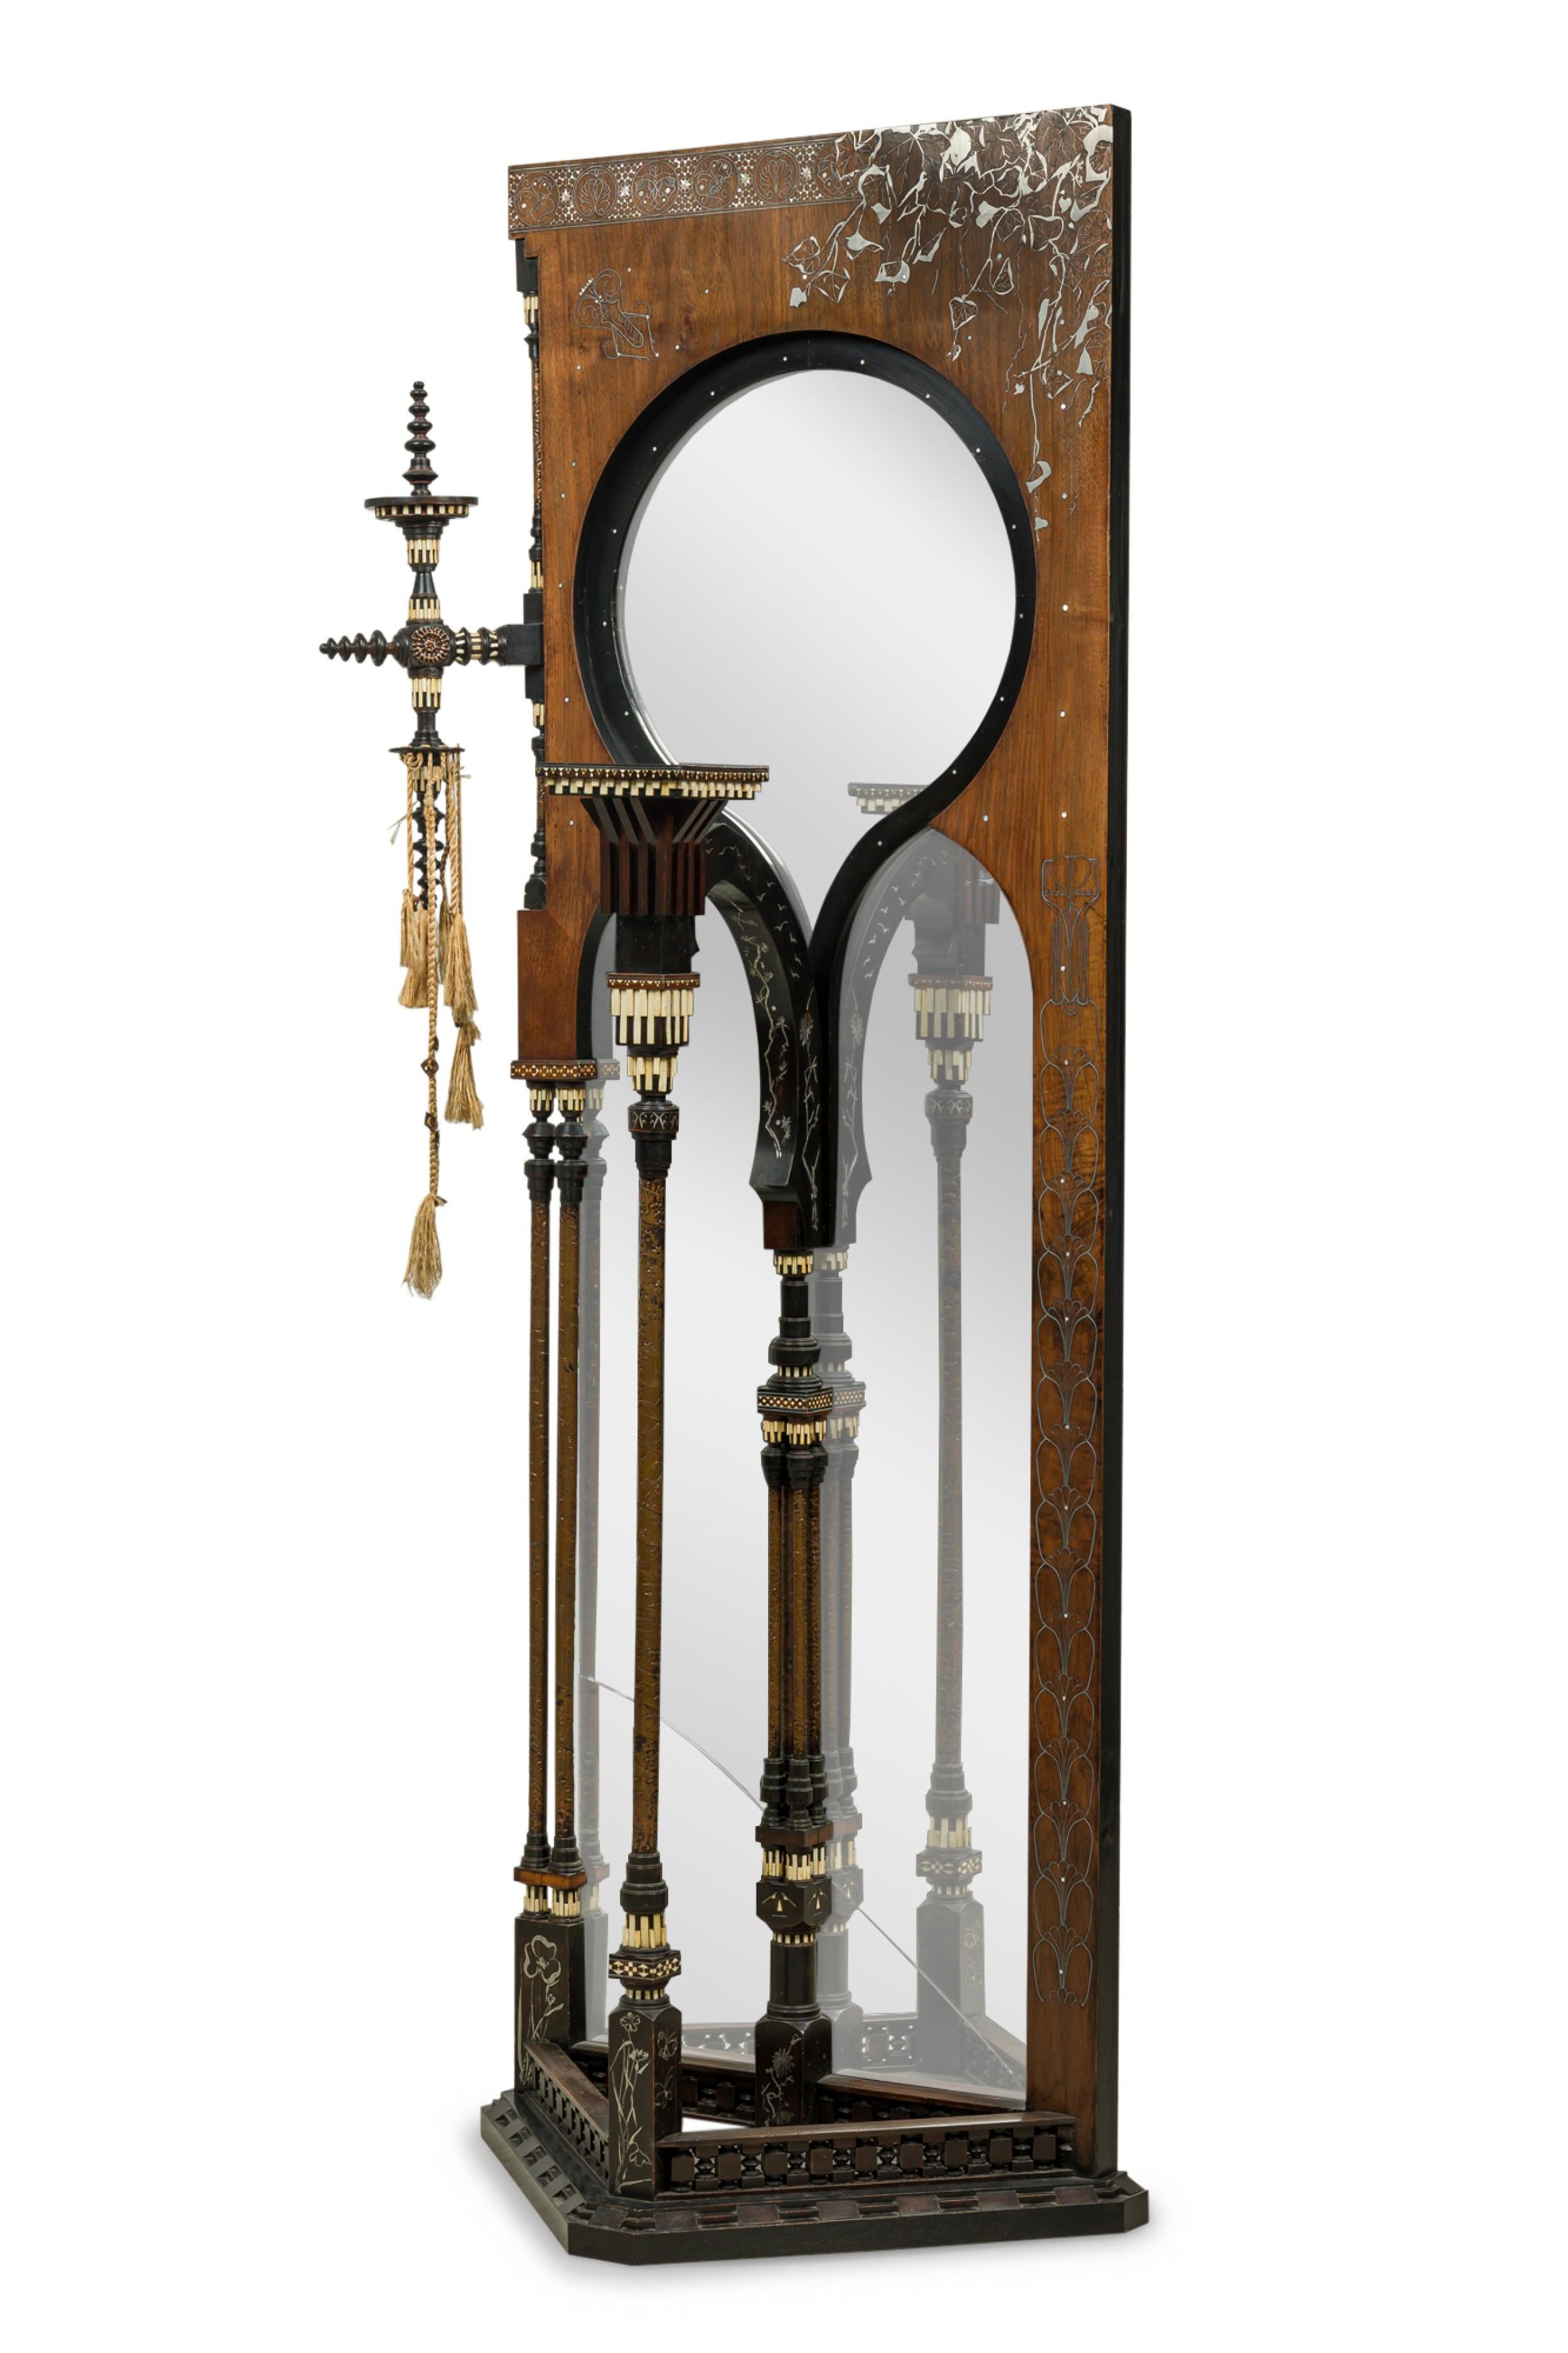 Italian Art Nouveau narrow hall / hatrack stand having a walnut & ebonized wood frame with pewter & pearl inlay and a shaped inset full-length mirror,with elaborate columns and center pedestal having copper veneer, featuring elaborate geometric bone